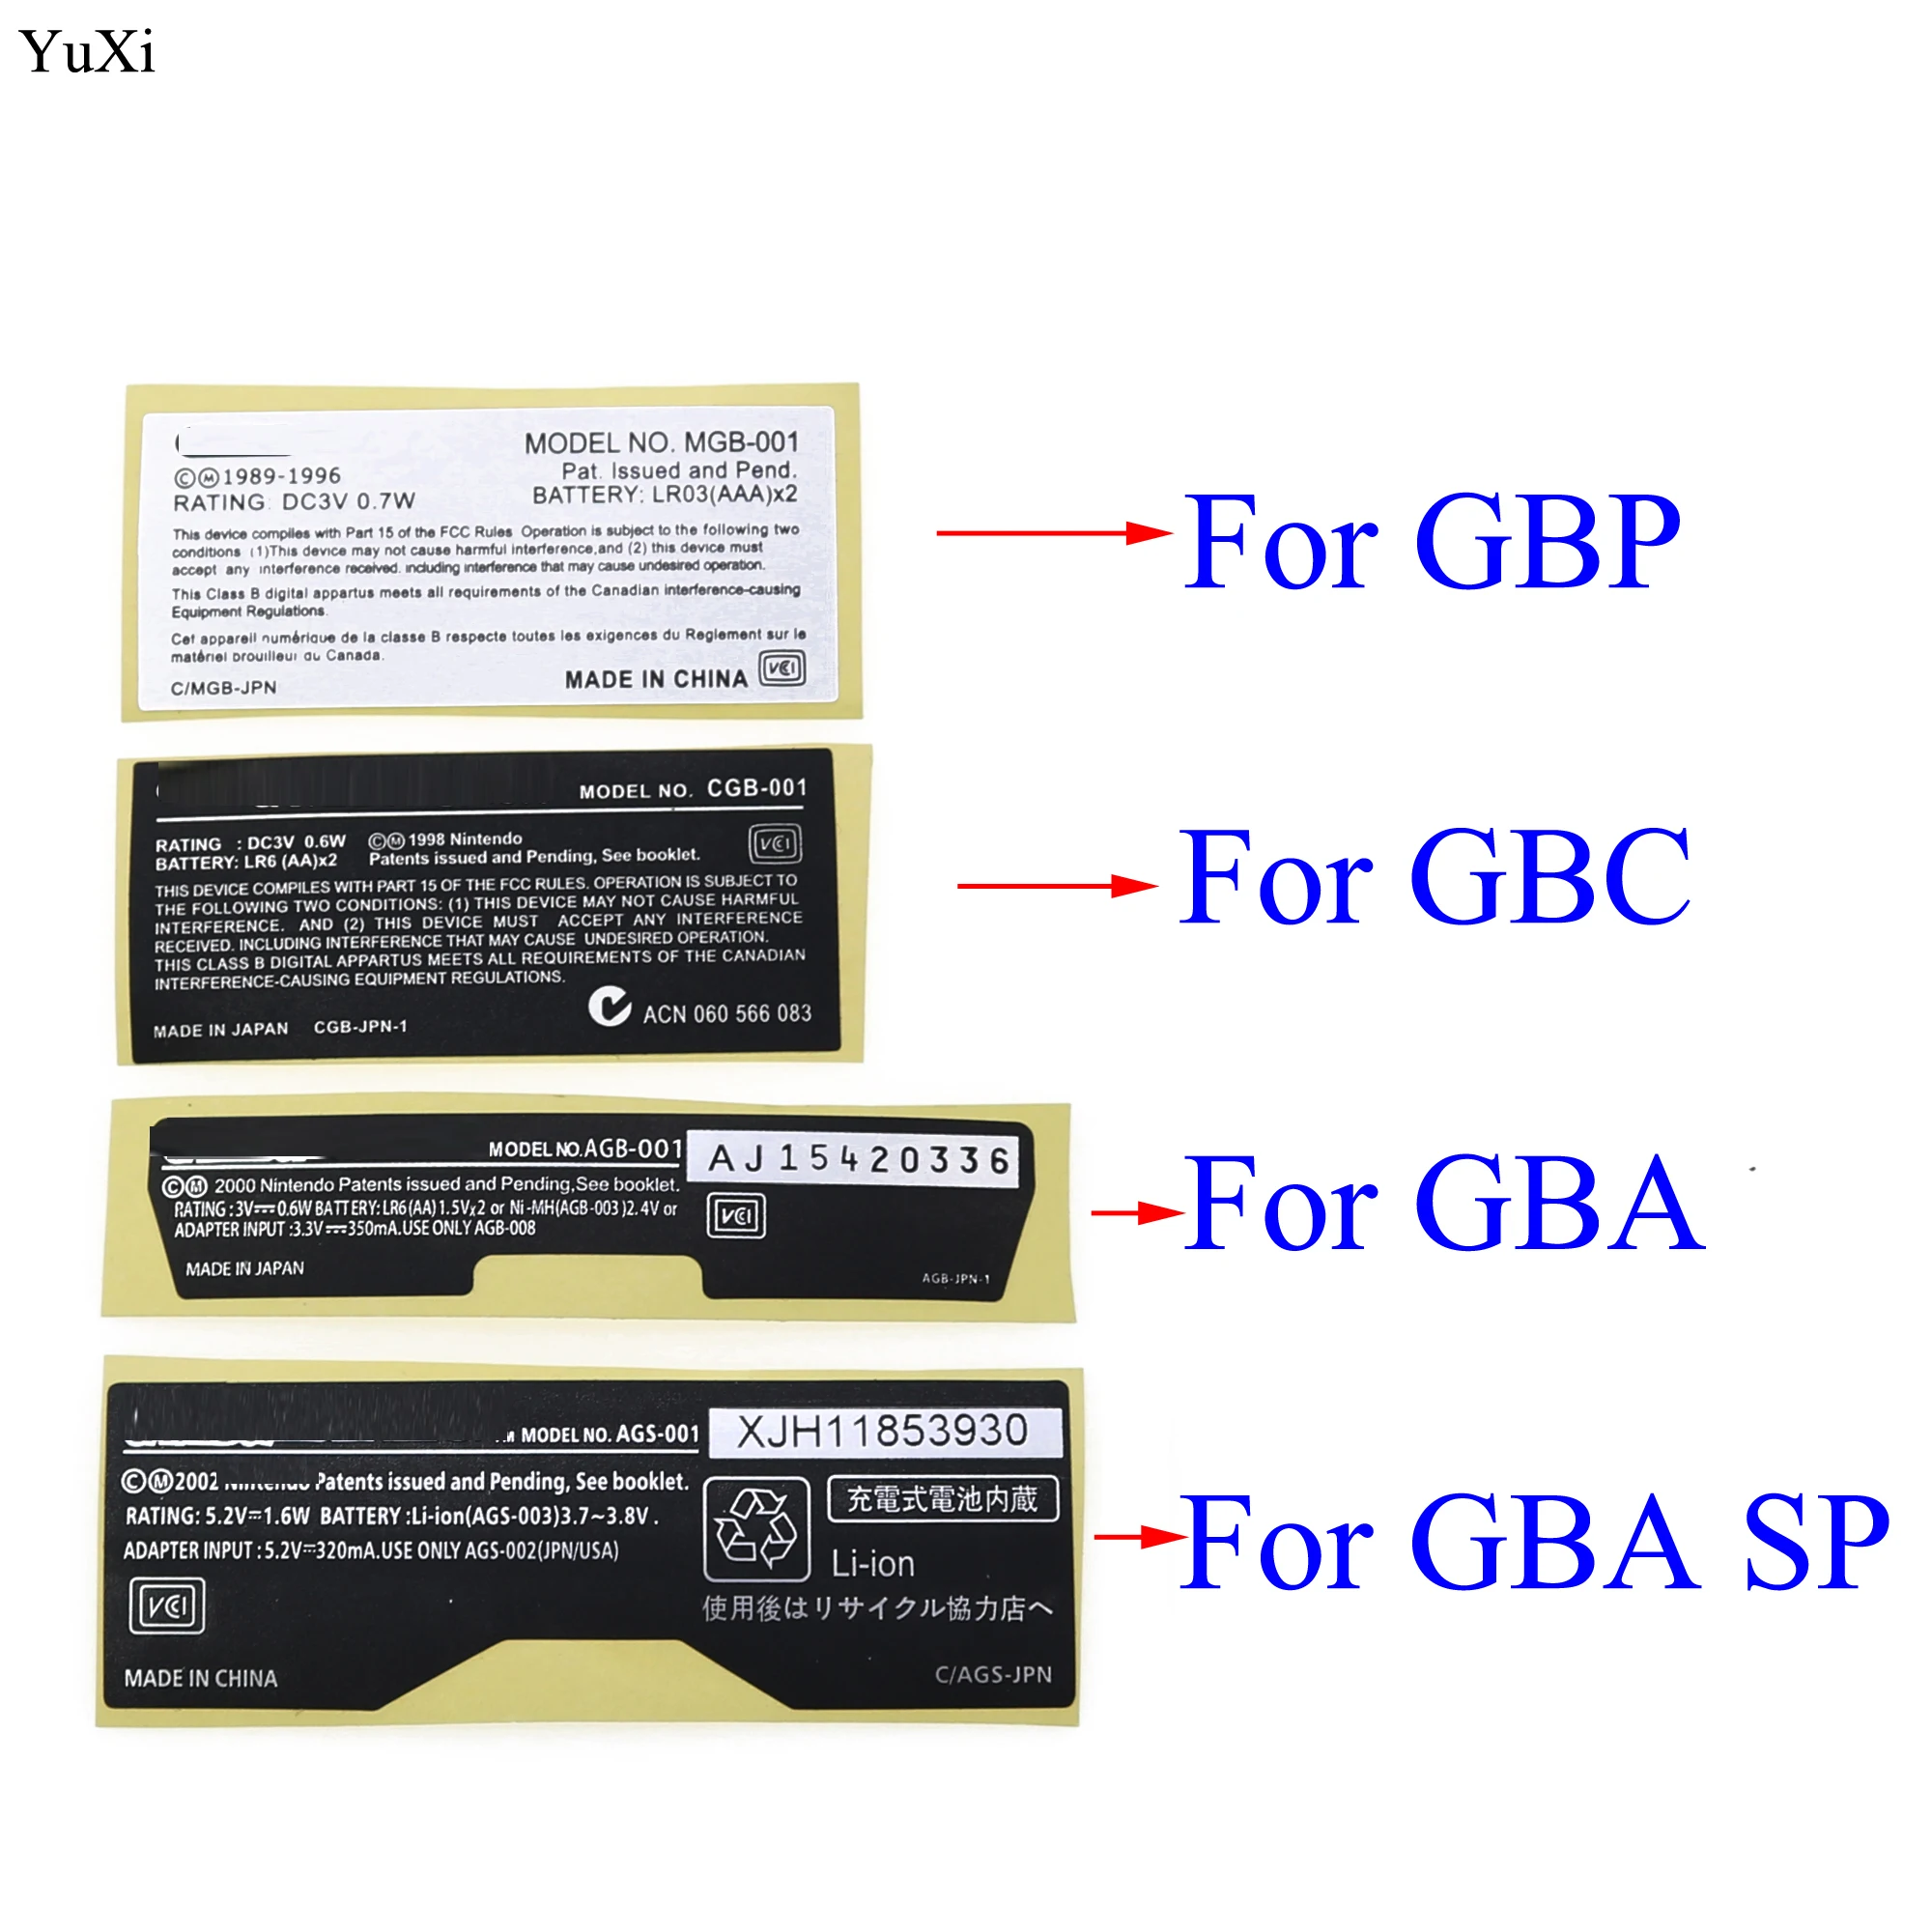 YuXi New Lables Back Stickers replacement for Gameboy Advance/ SP/ Color for GBA/ GBA SP/ GBC/GBP Game Console